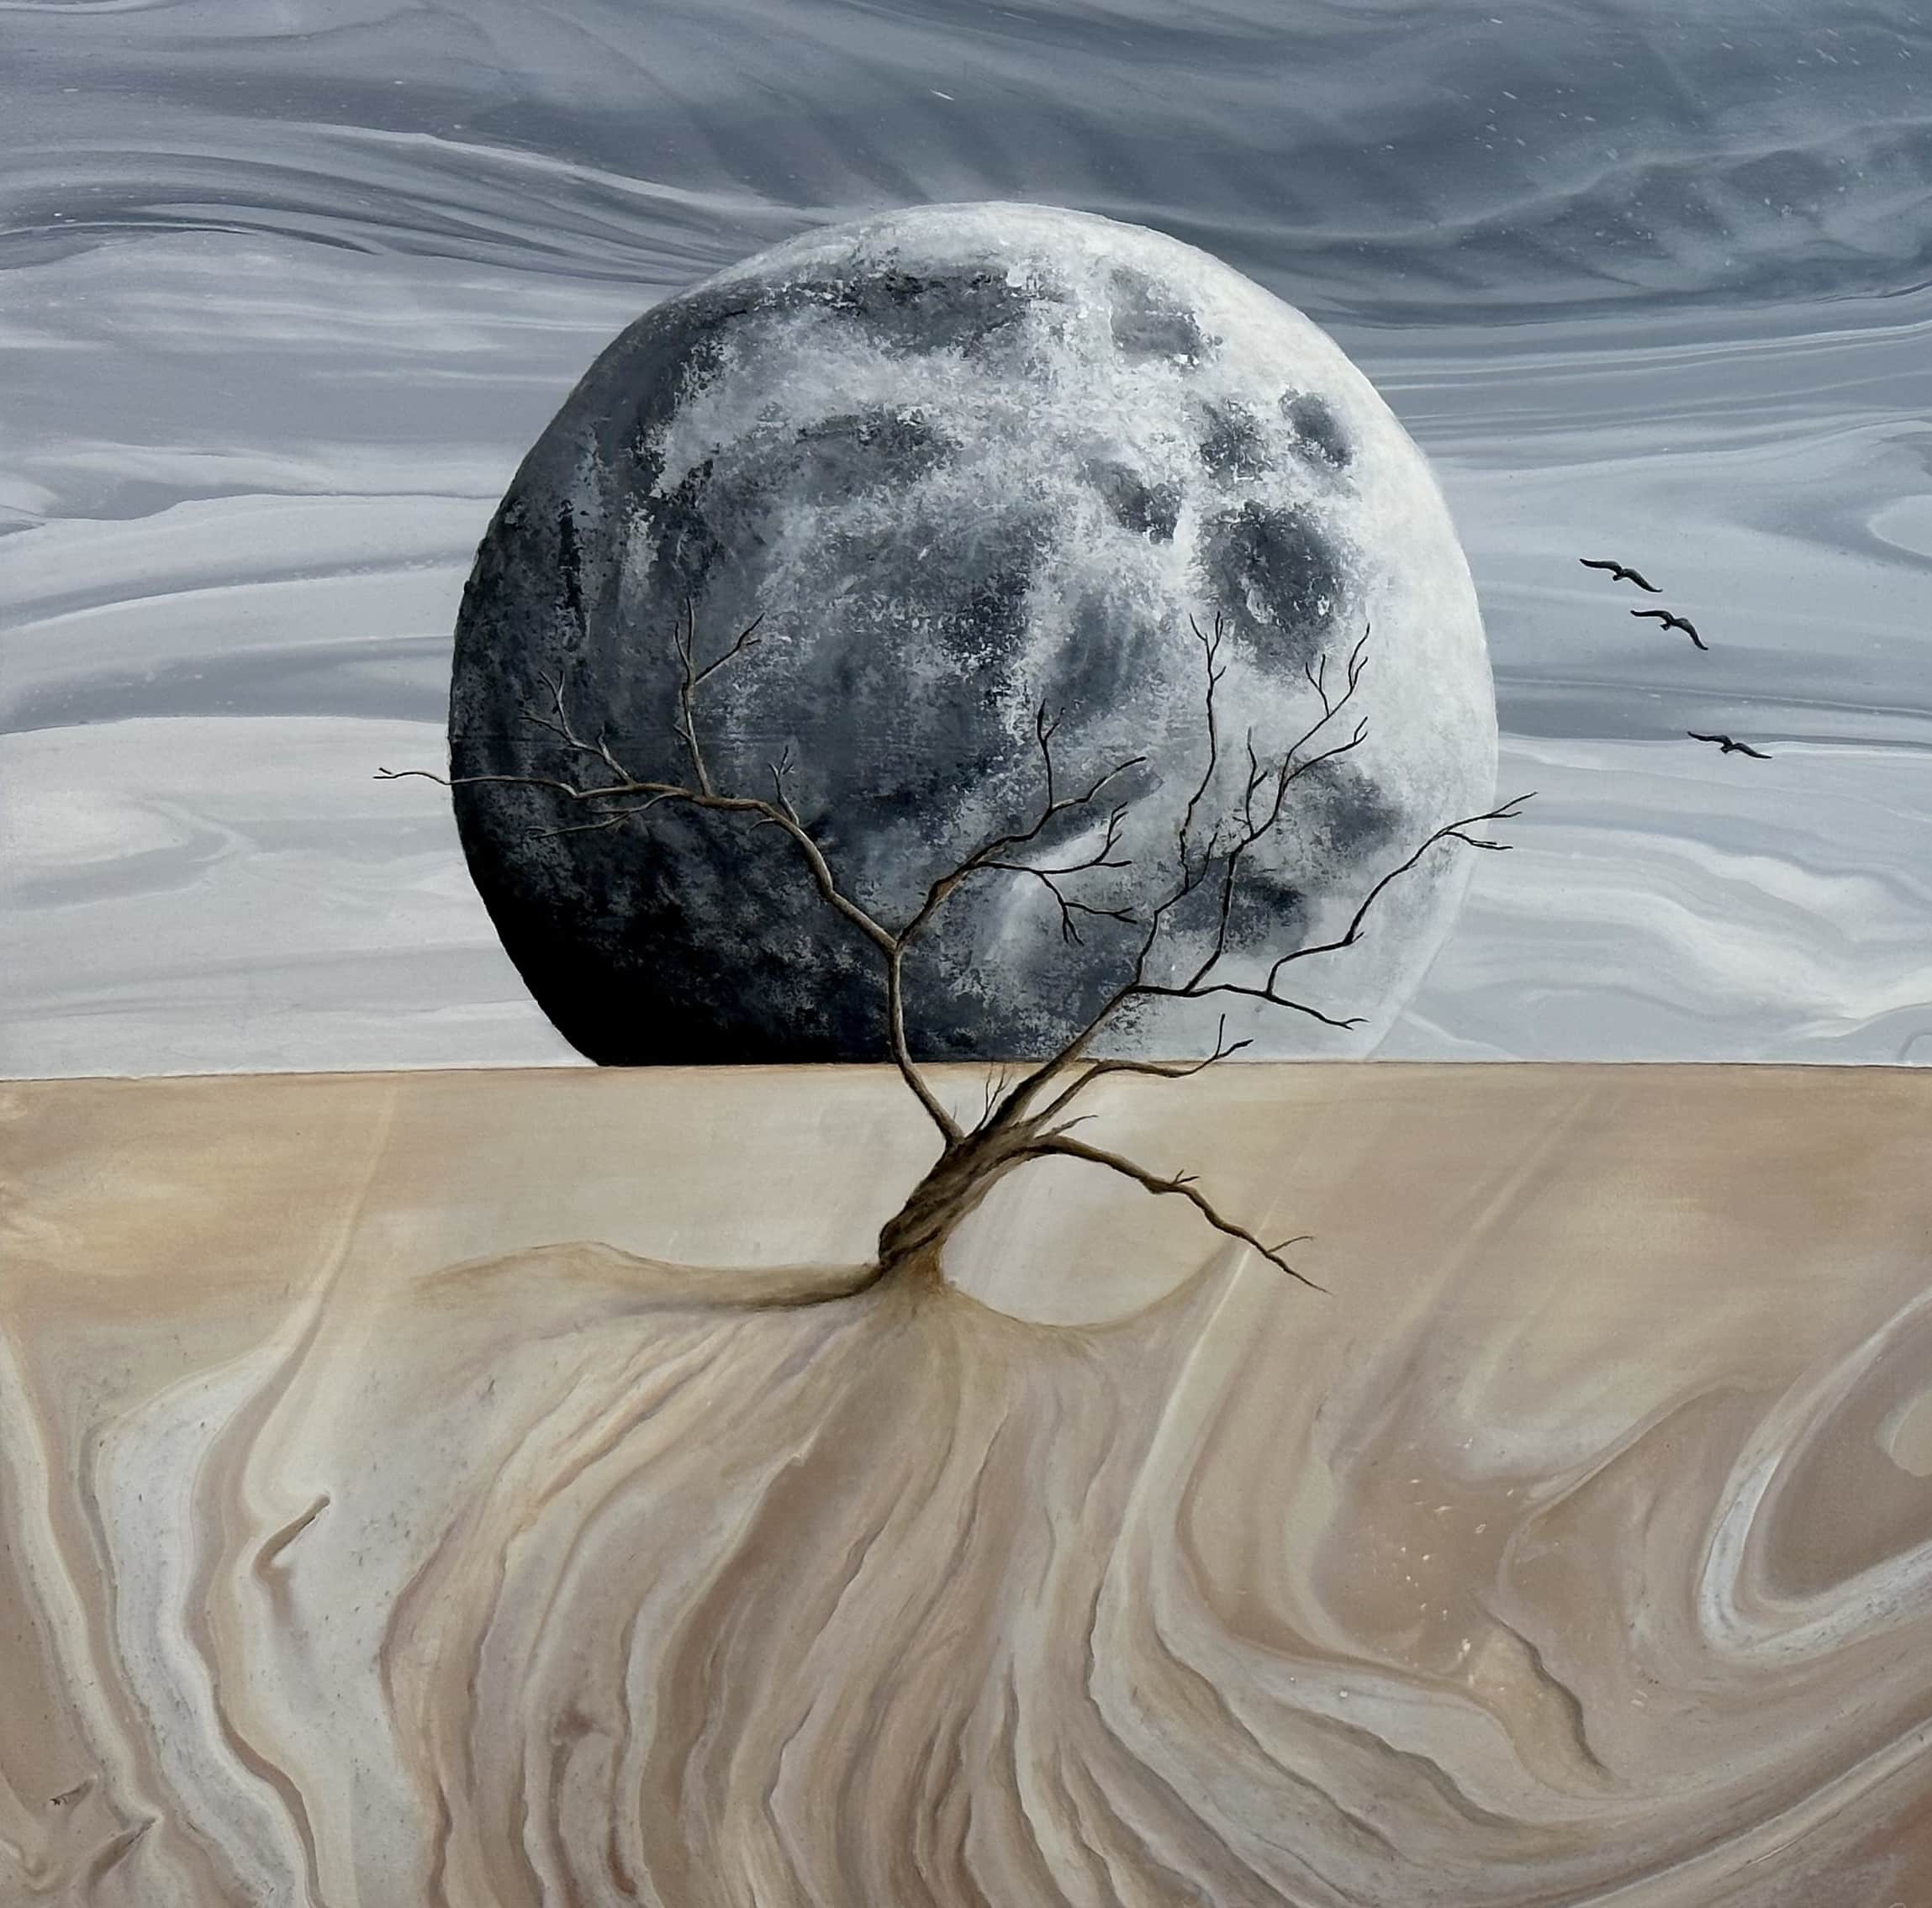 Caropour "Talking to the moon" (2023) Embelished Landscape Pouring. Acrylic on canvas, 90 x 90 x 7 cm